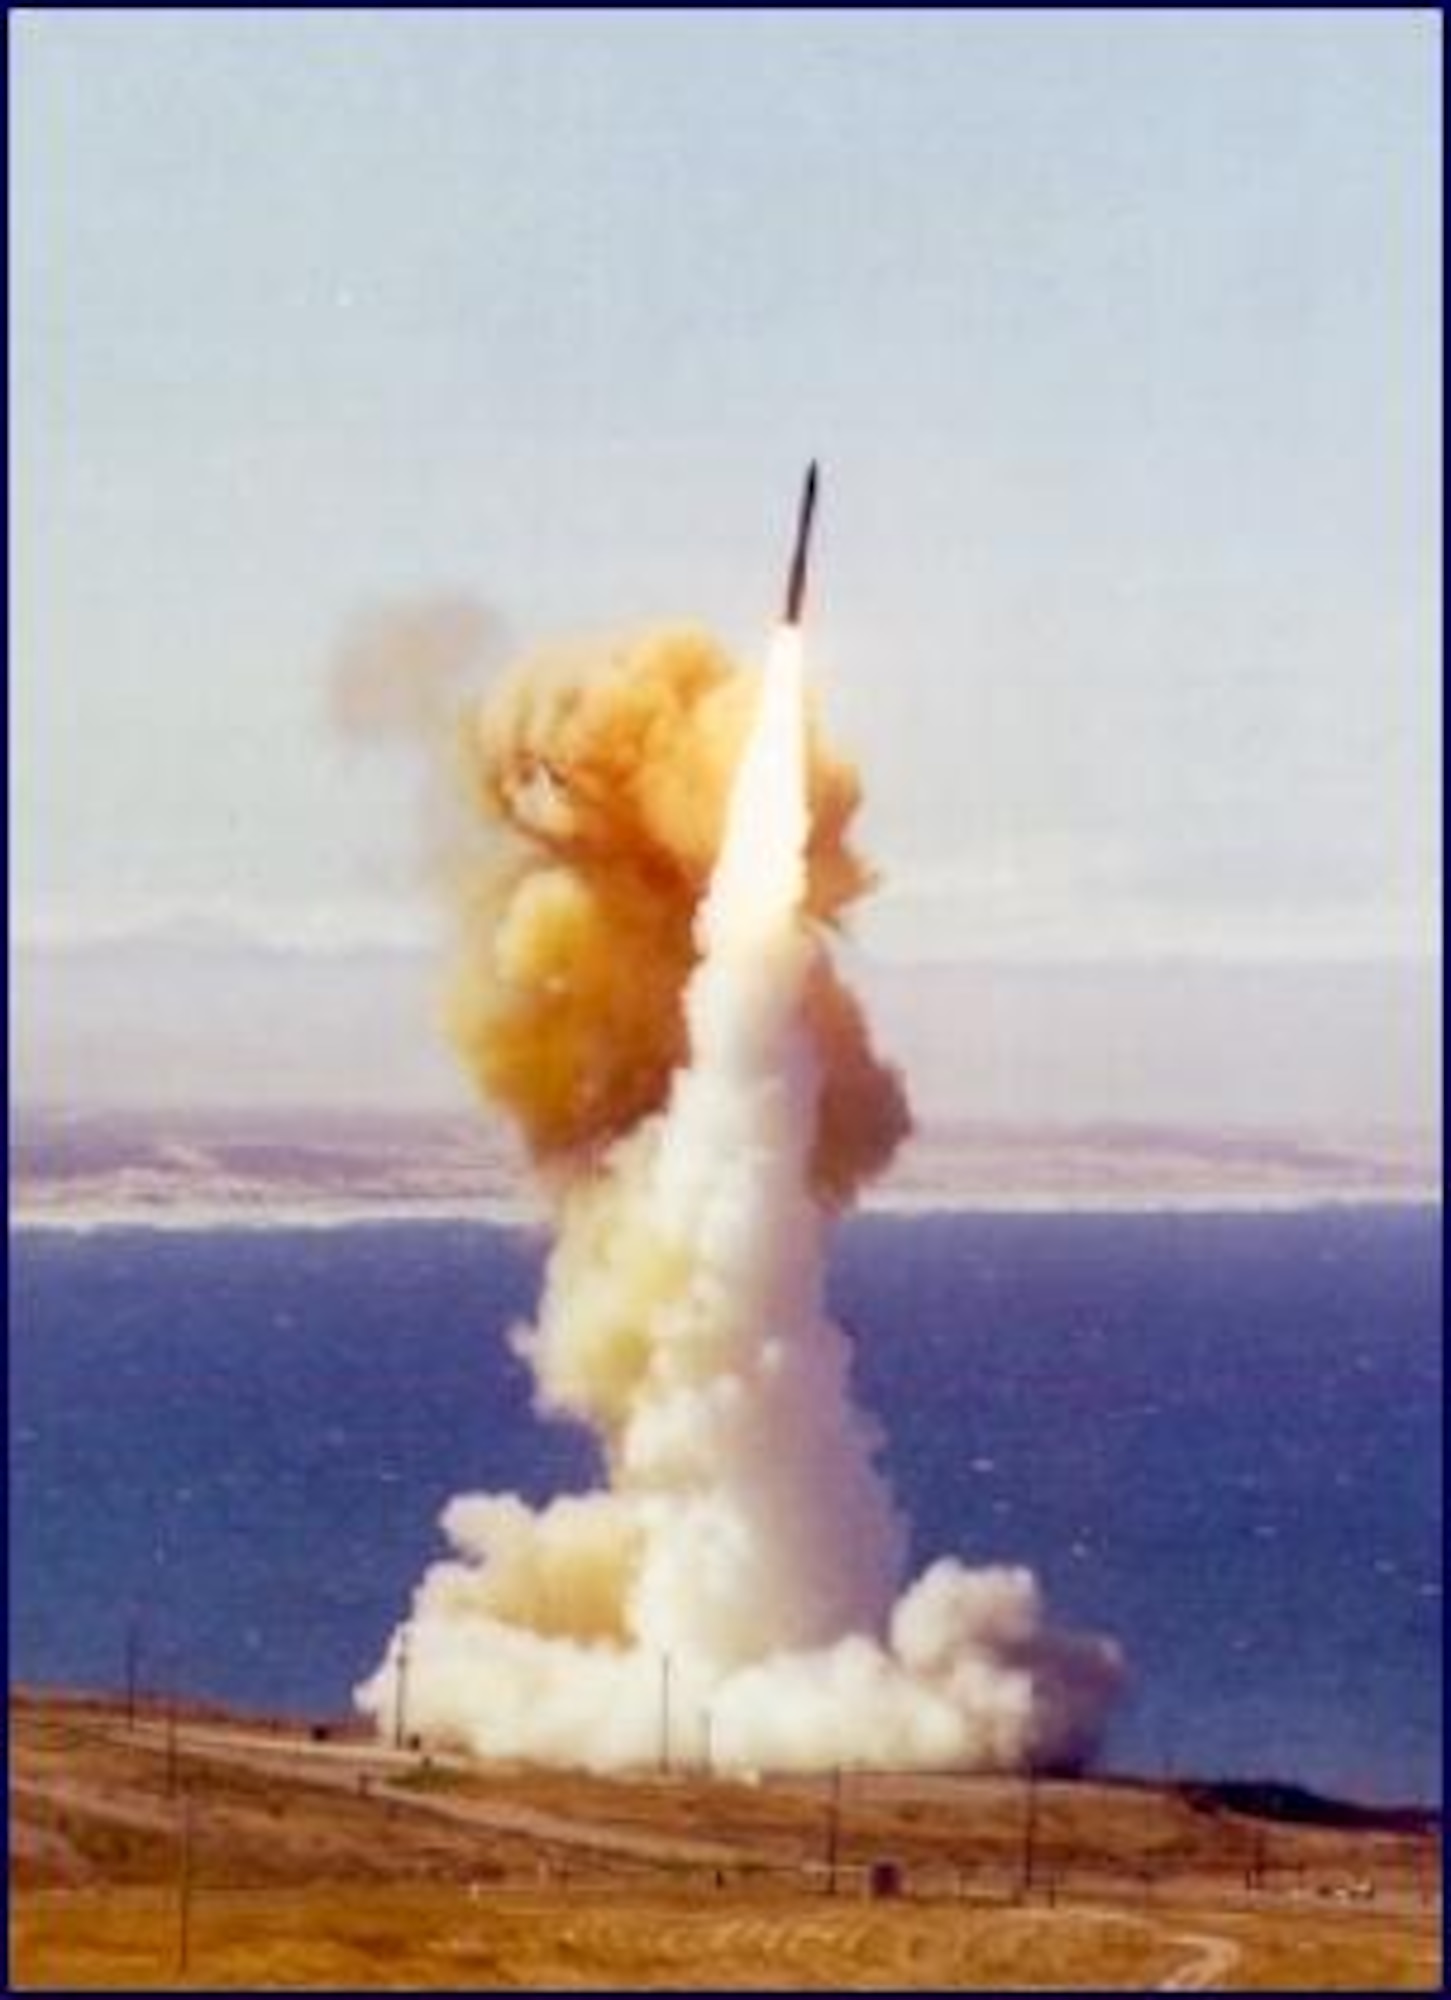 The LGM-30G Minuteman intercontinental ballistic missile (ICBM) is an element of the nation’s strategic deterrent forces. The "L" in LGM is the Department of Defense designation for silo-launched; "G" means surface attack; and "M" stands for guided missile.

